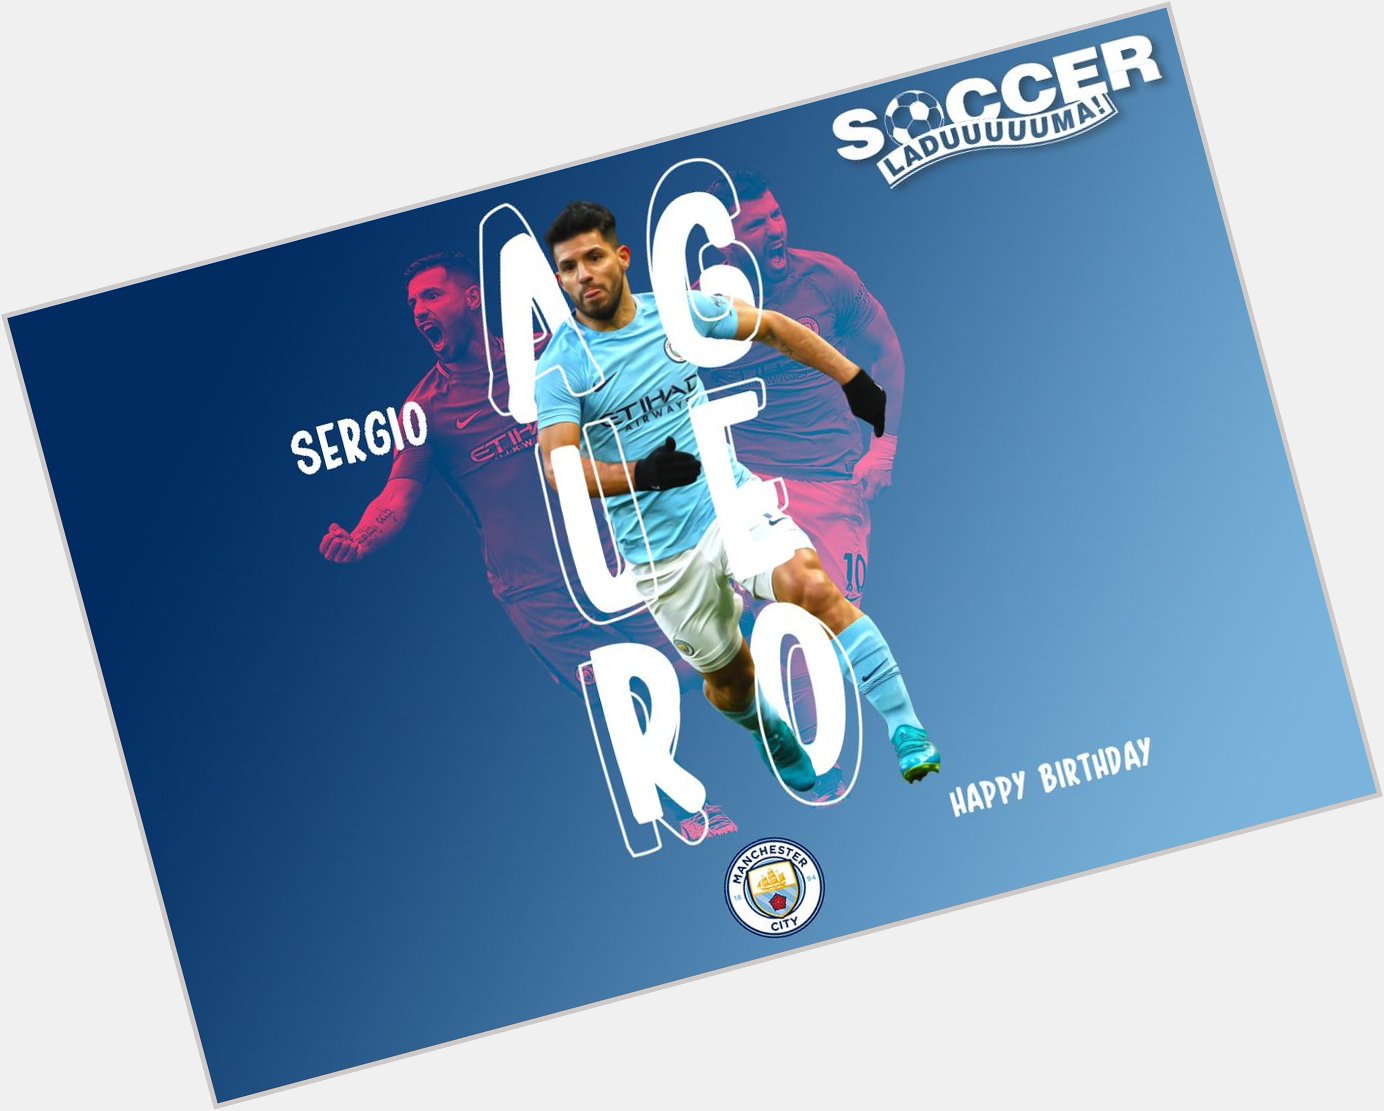 Manchester City\s Sergio Aguero is turning 30 today! Join us in wishing the striker a Happy Birthday! 